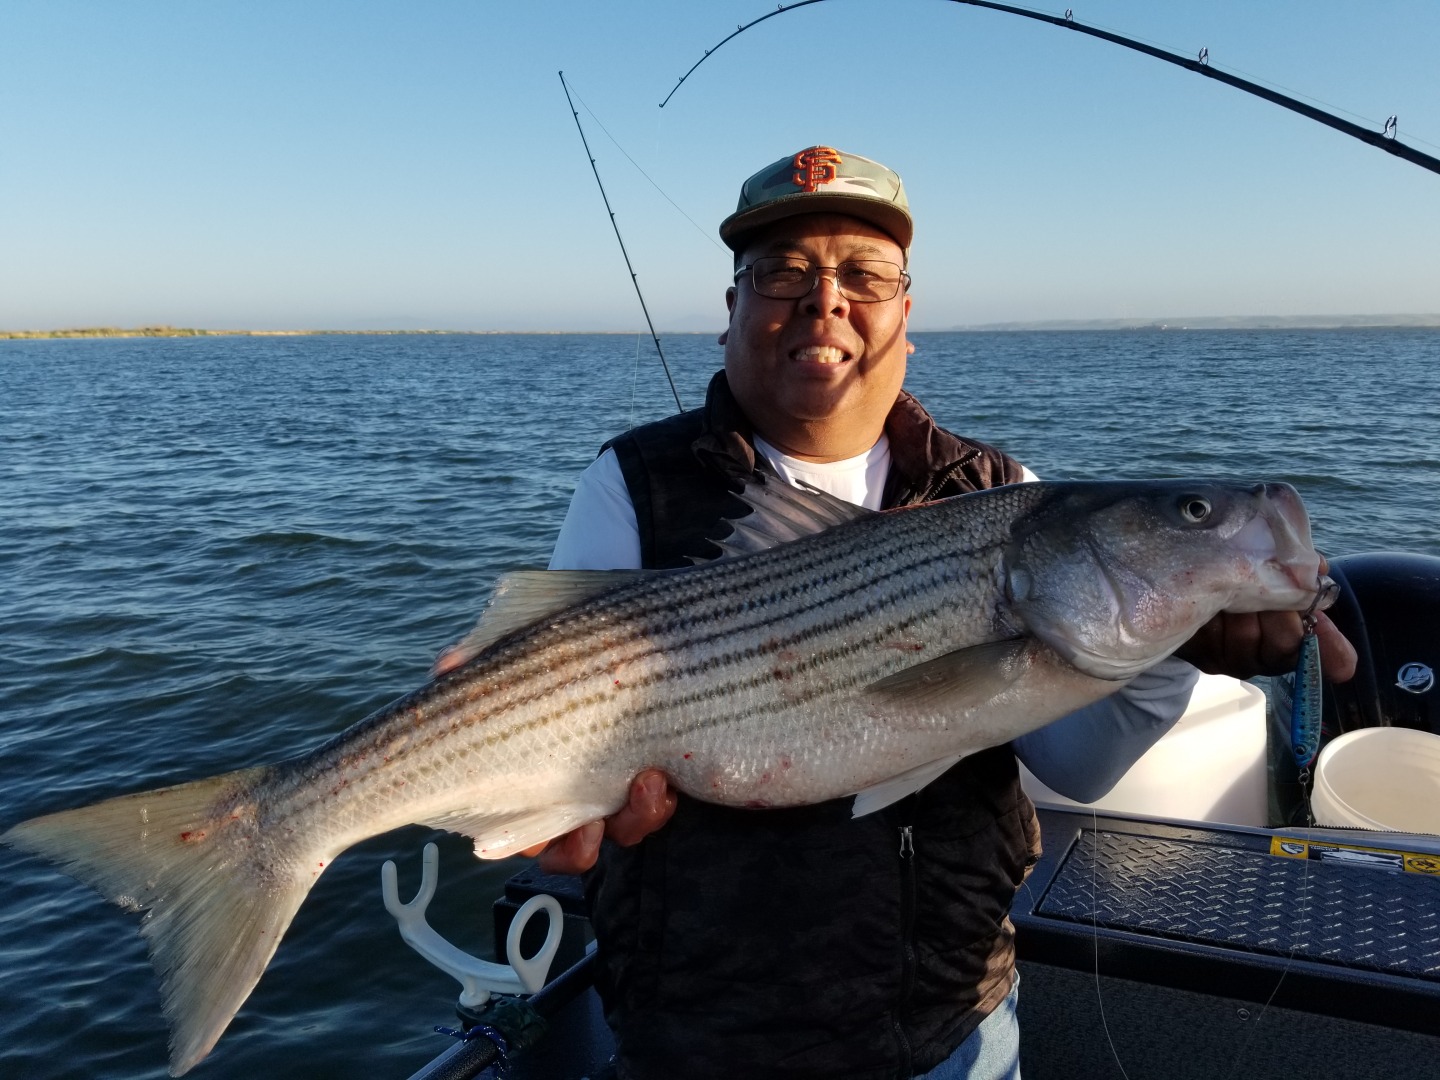 Stripers and more stripers!